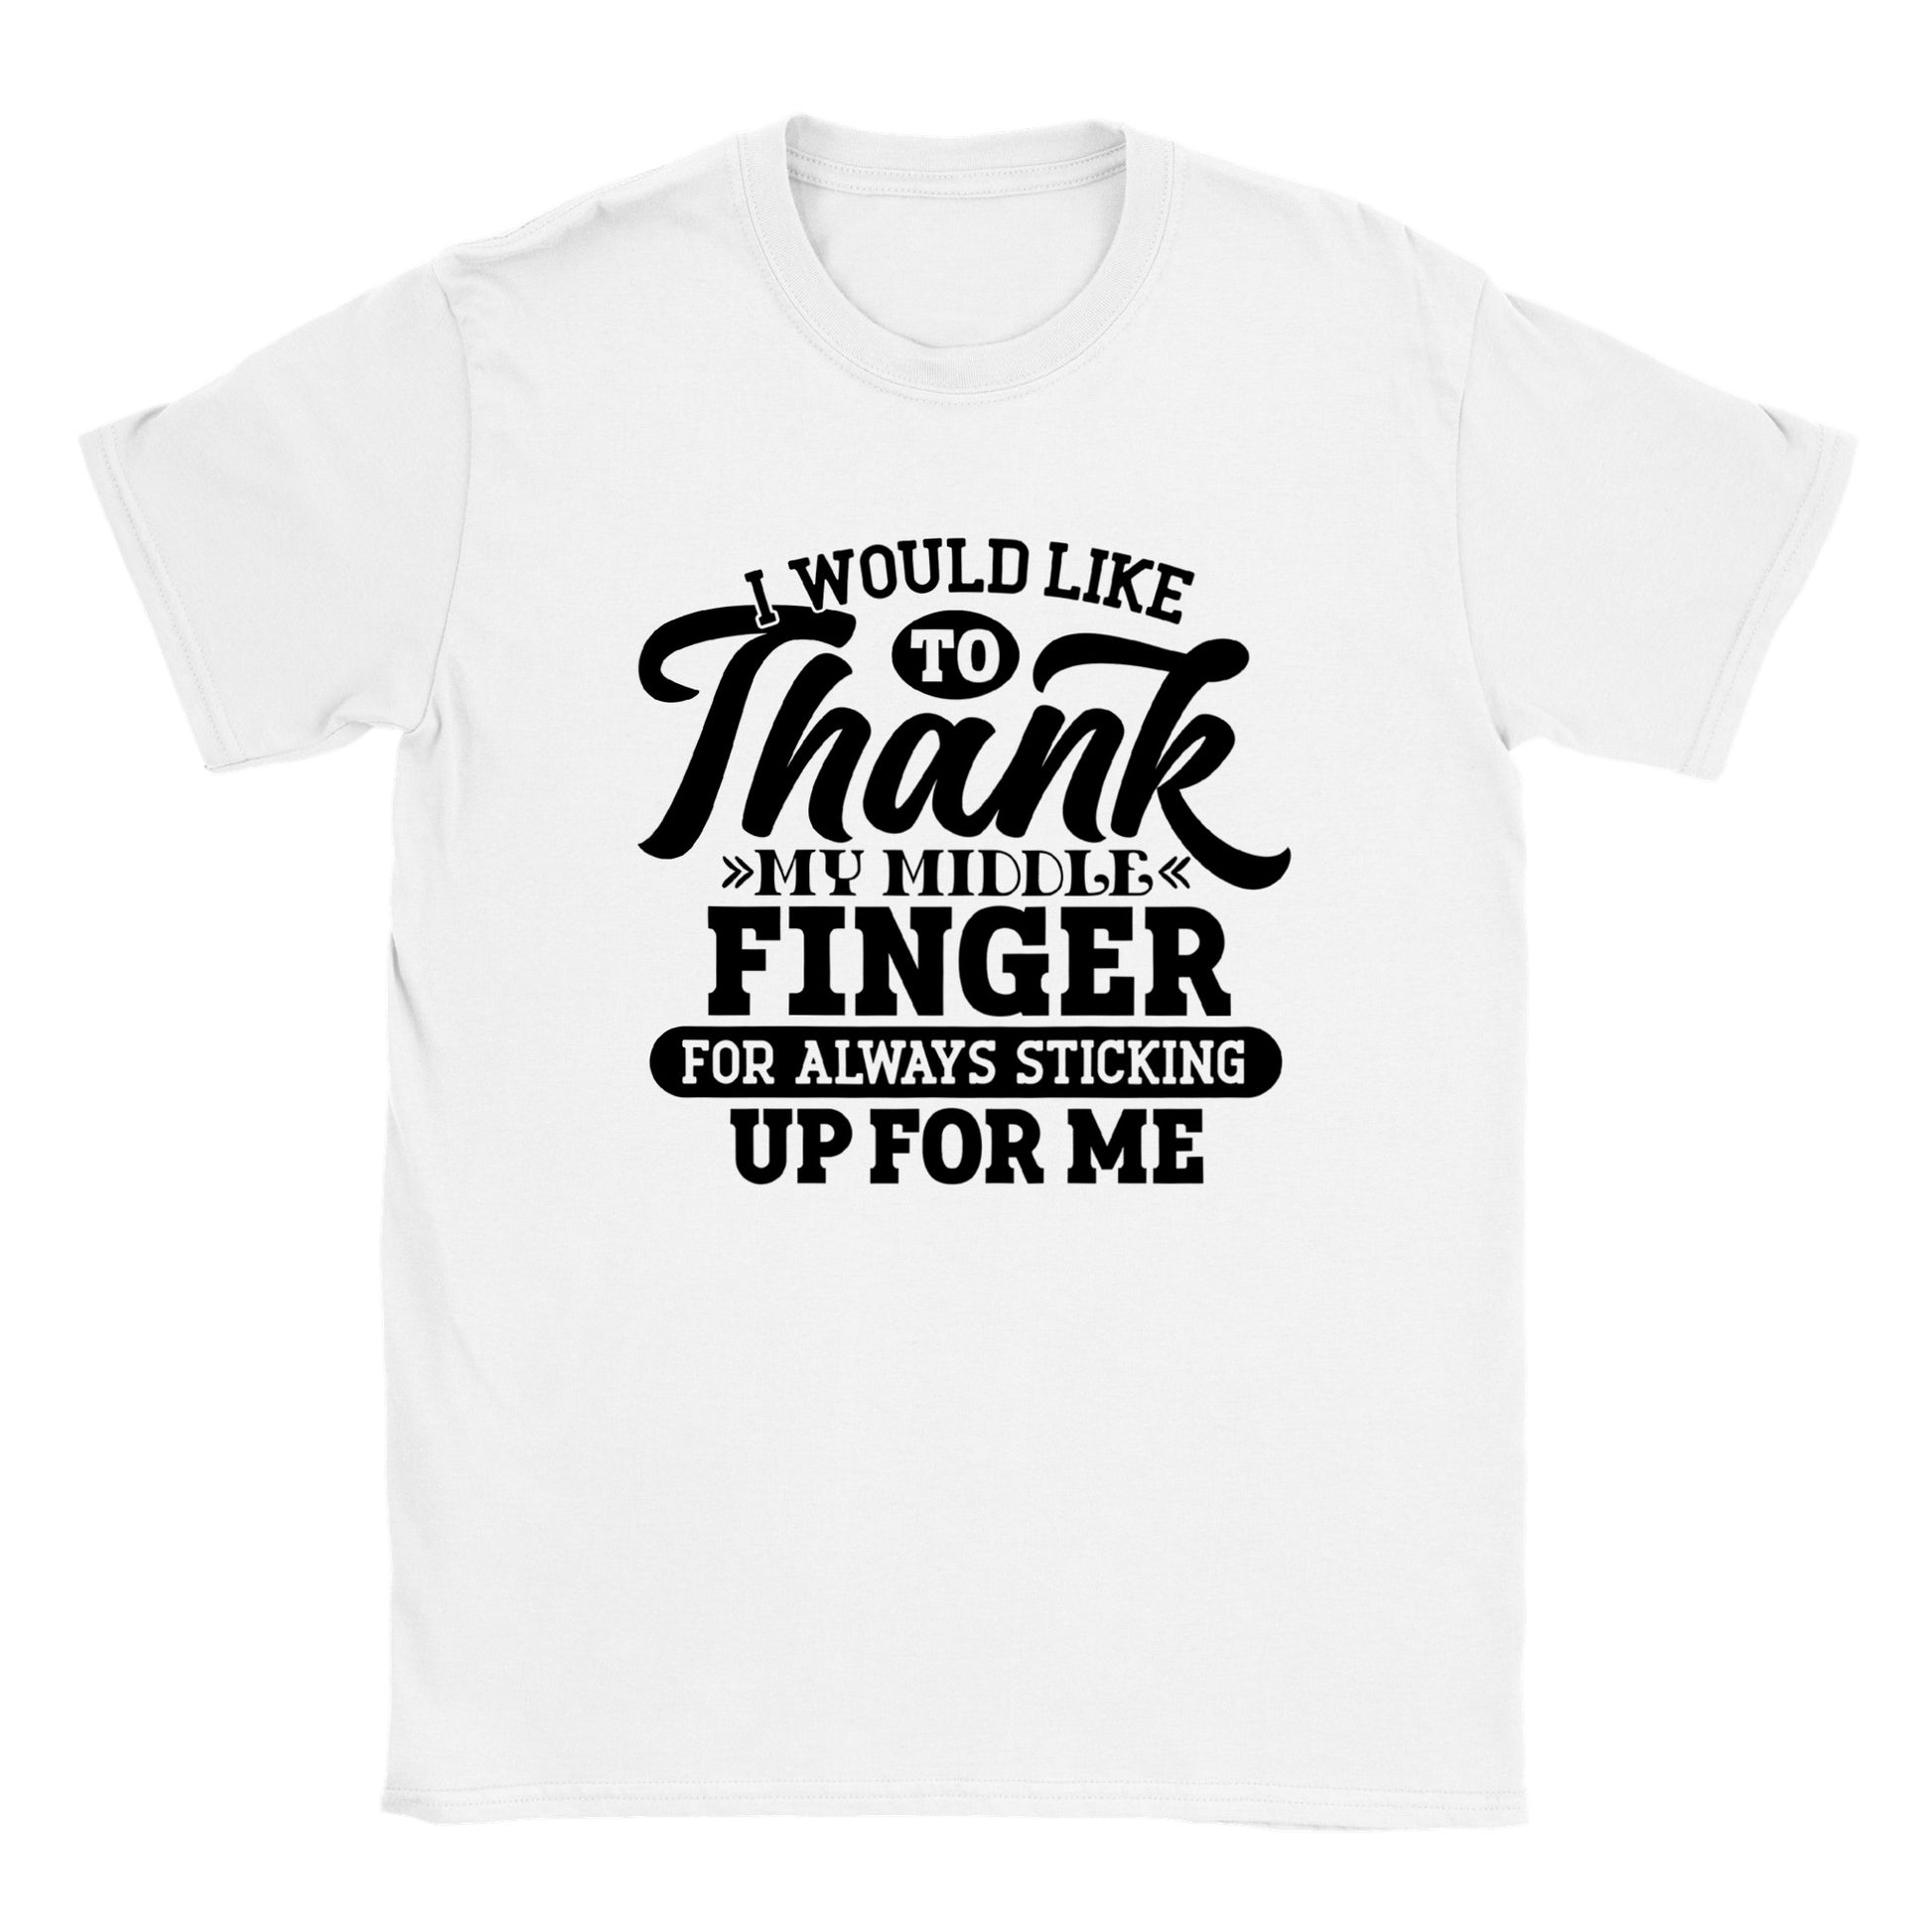 I Would LIke to Thank My MIddle Finger - Classic Unisex Crewneck T-shirt - Mister Snarky's